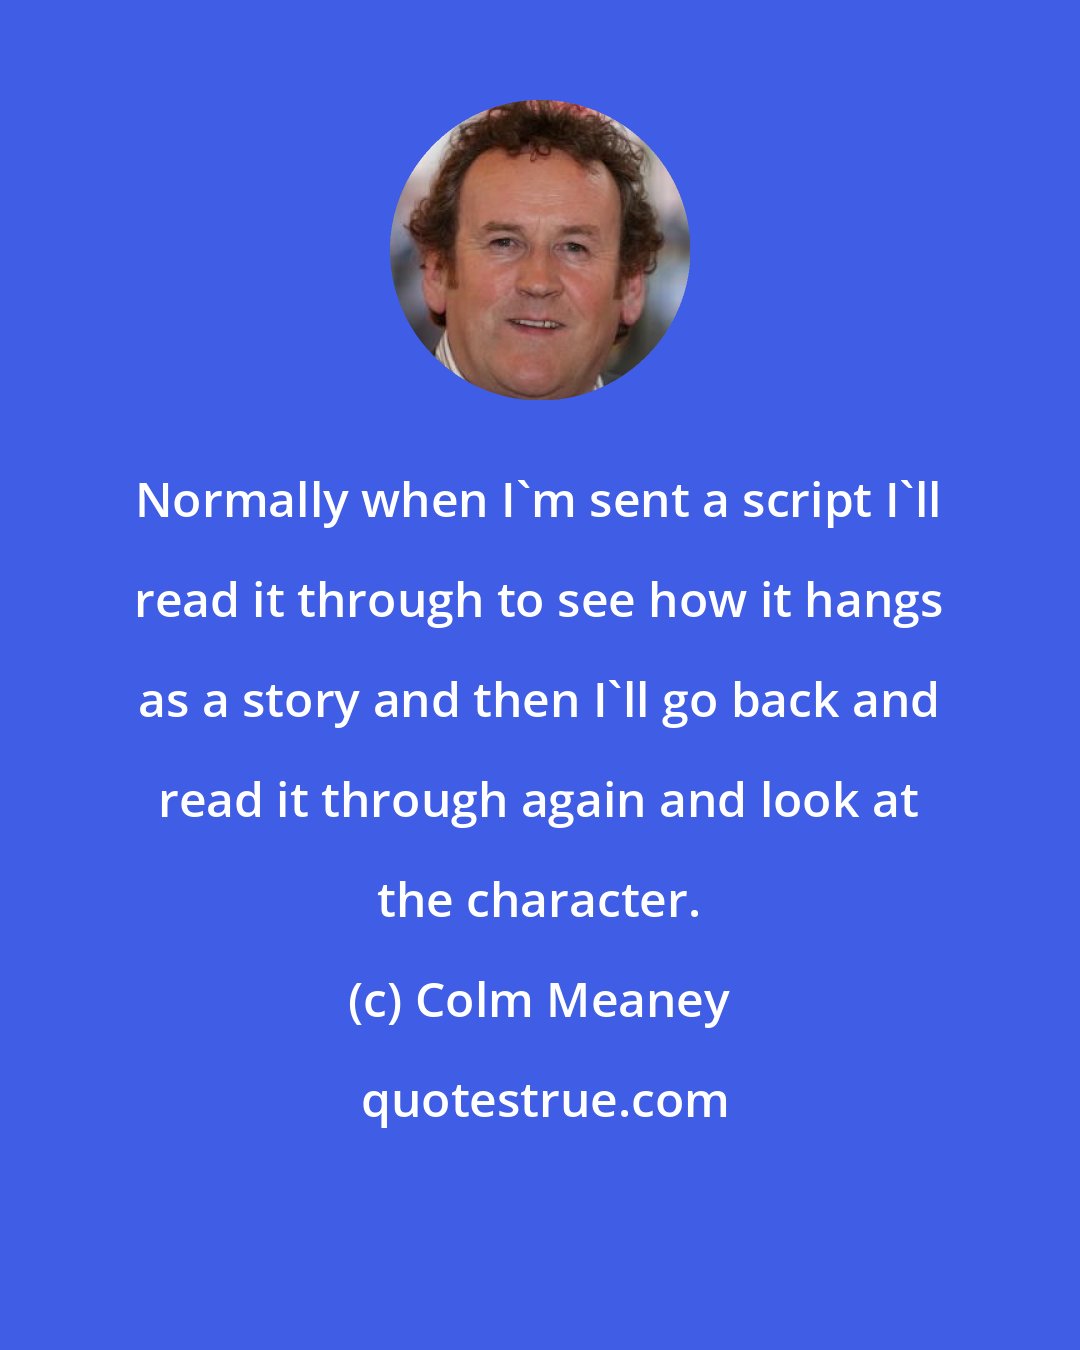 Colm Meaney: Normally when I'm sent a script I'll read it through to see how it hangs as a story and then I'll go back and read it through again and look at the character.